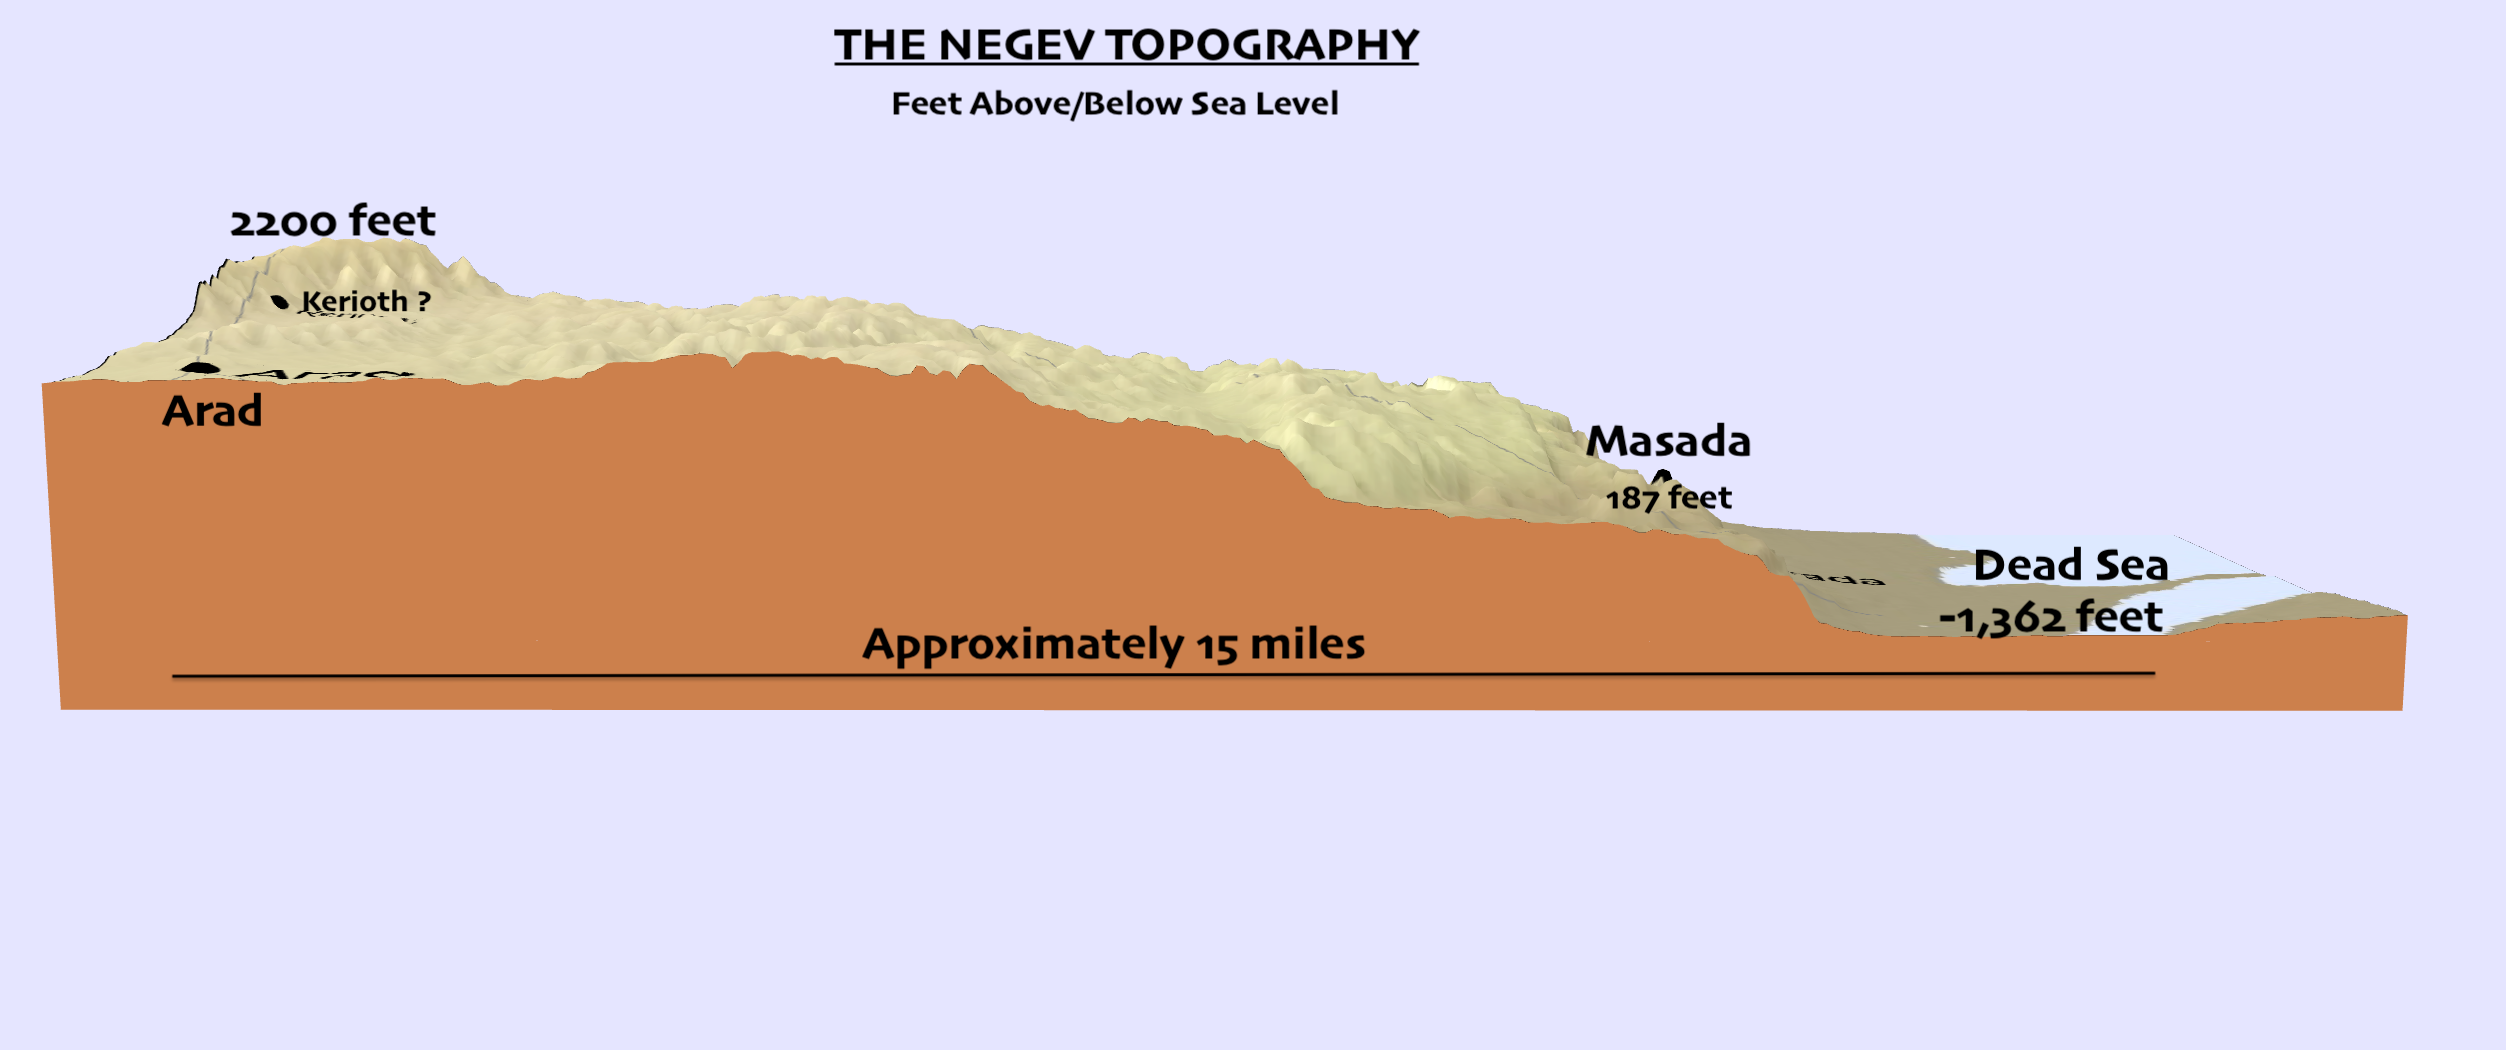 A cross section of the elevation differences in the Negev.